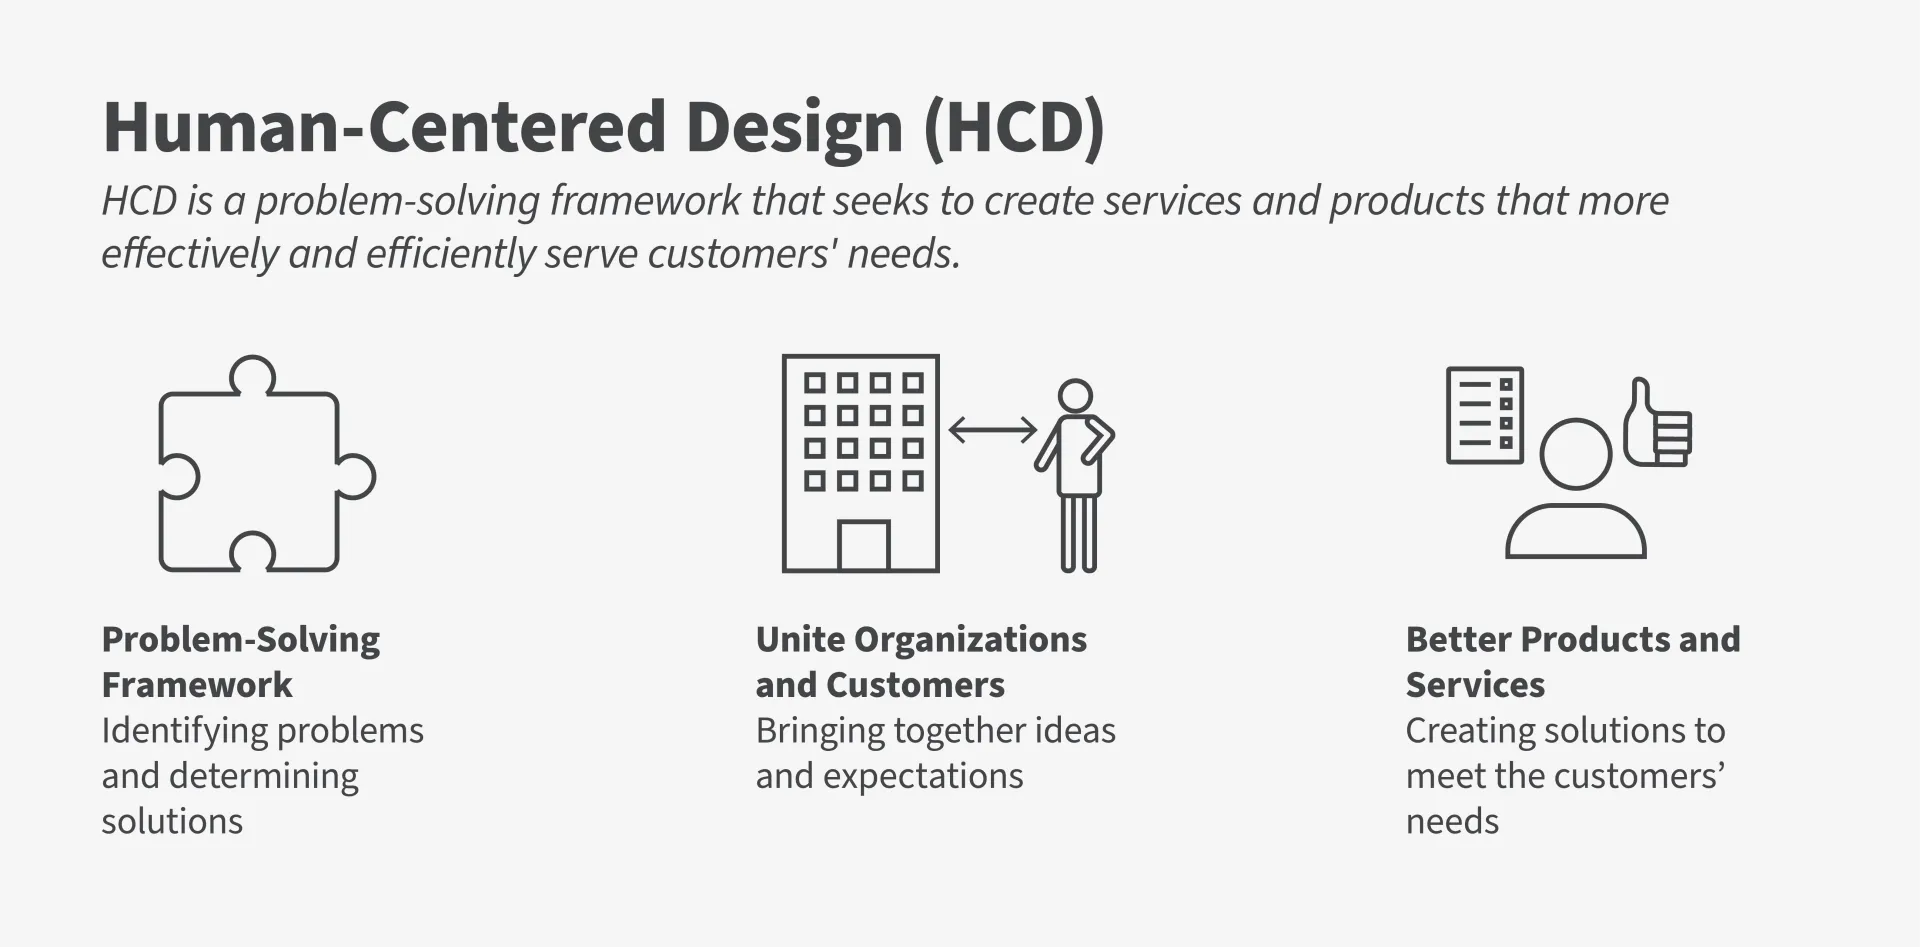 Infographic showing three icons that represent human-centered design as a problem-solving framework that unites organizations and customers to create better products and services.  